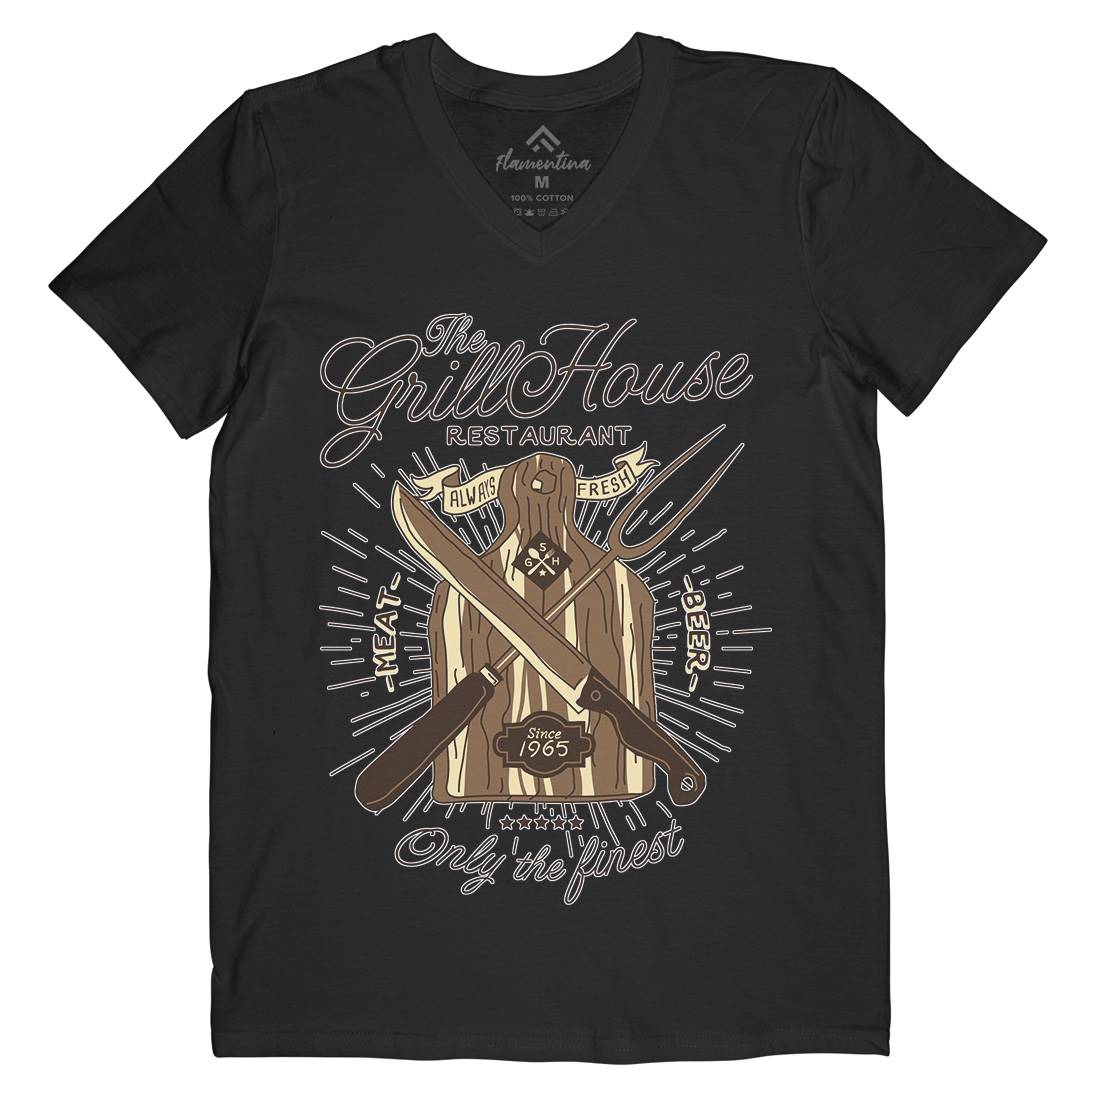 Grill House Mens V-Neck T-Shirt Food A981